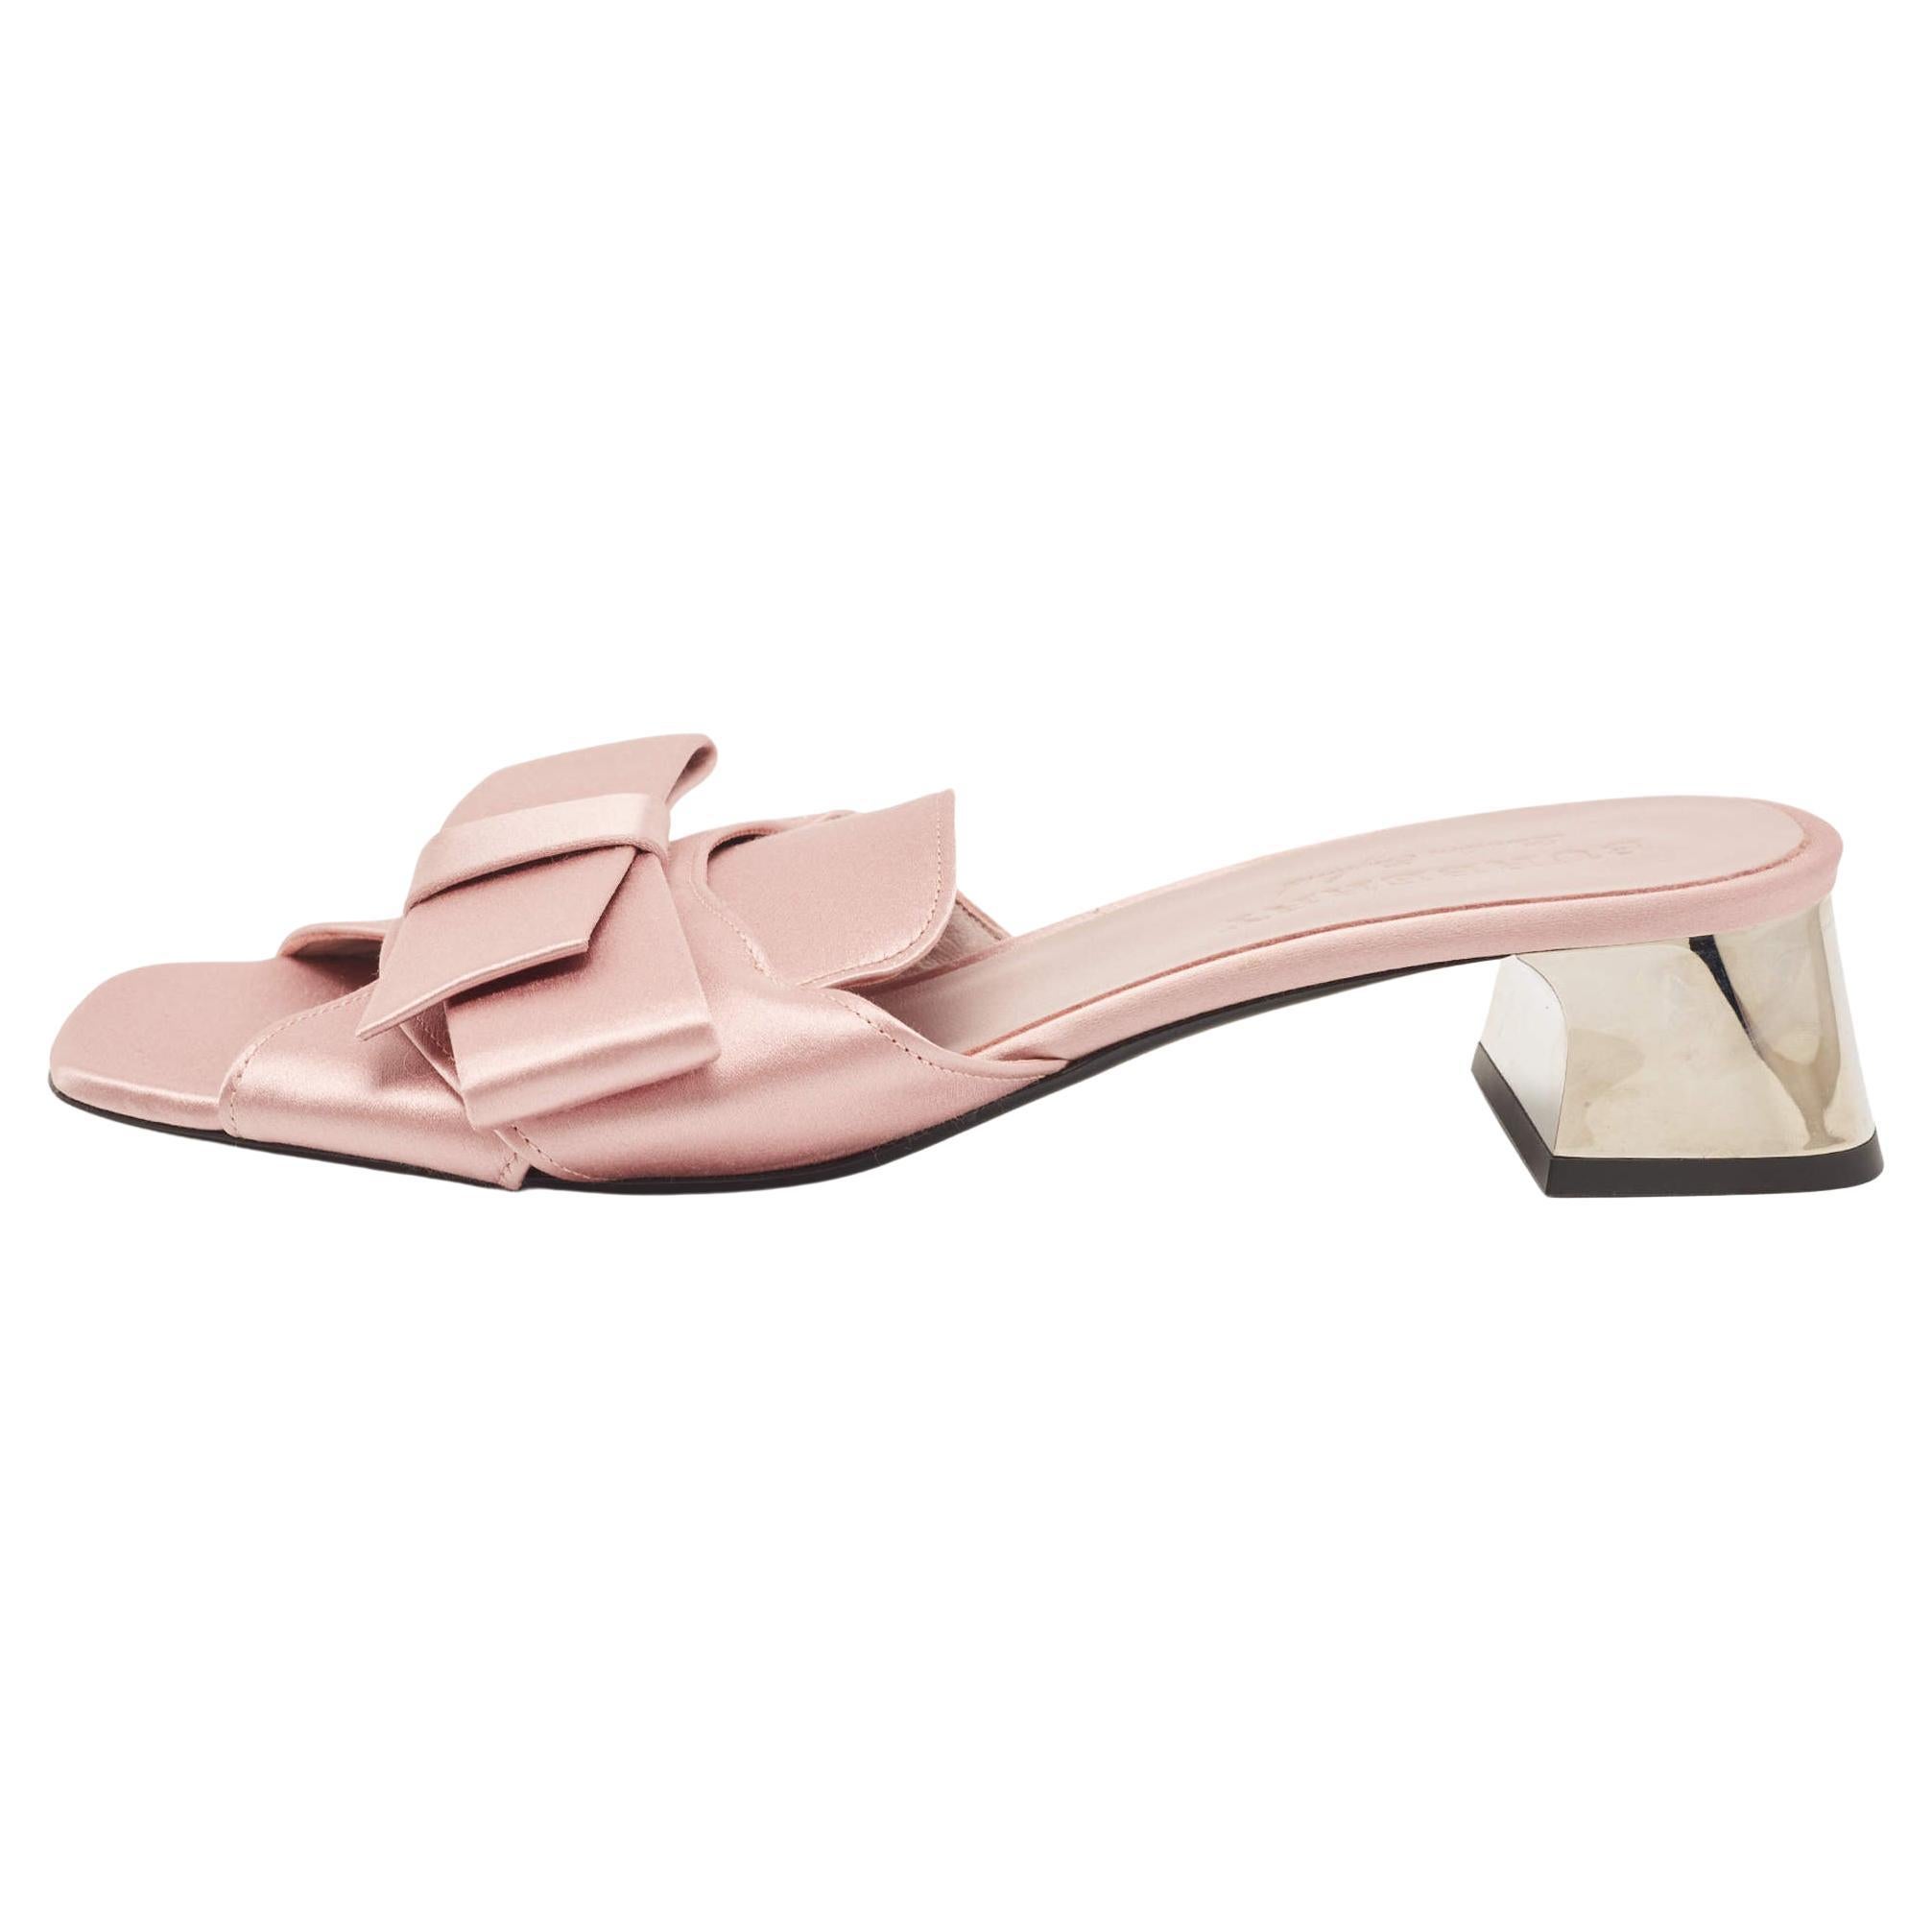 Burberry Pink Satin Bow Mules Size 41